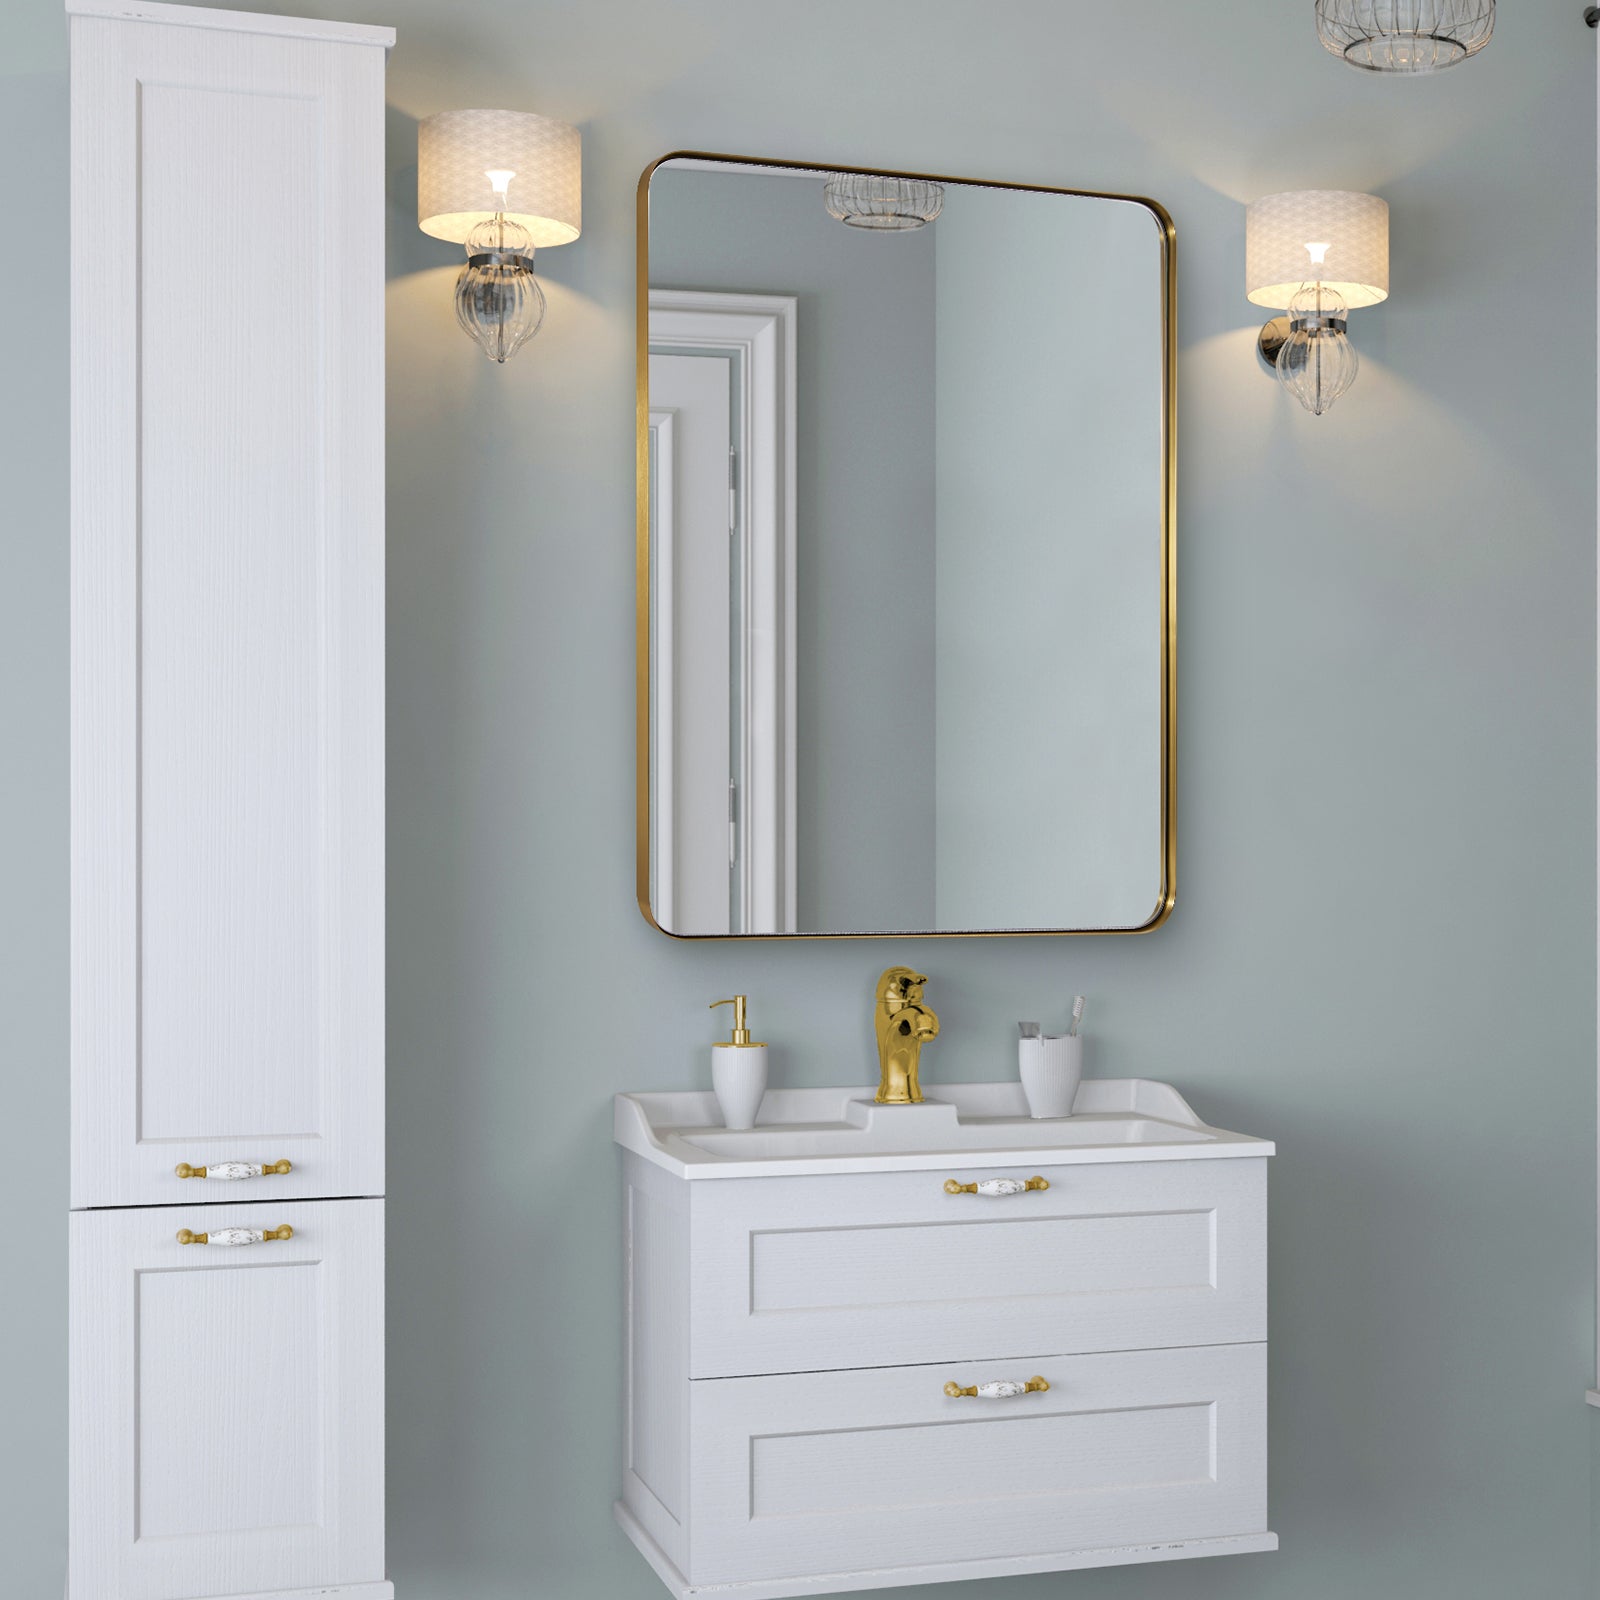 Luxury Brushed Gold Rectangle Bathroom/ Vanity Mirrors with Stainless Steel Frame